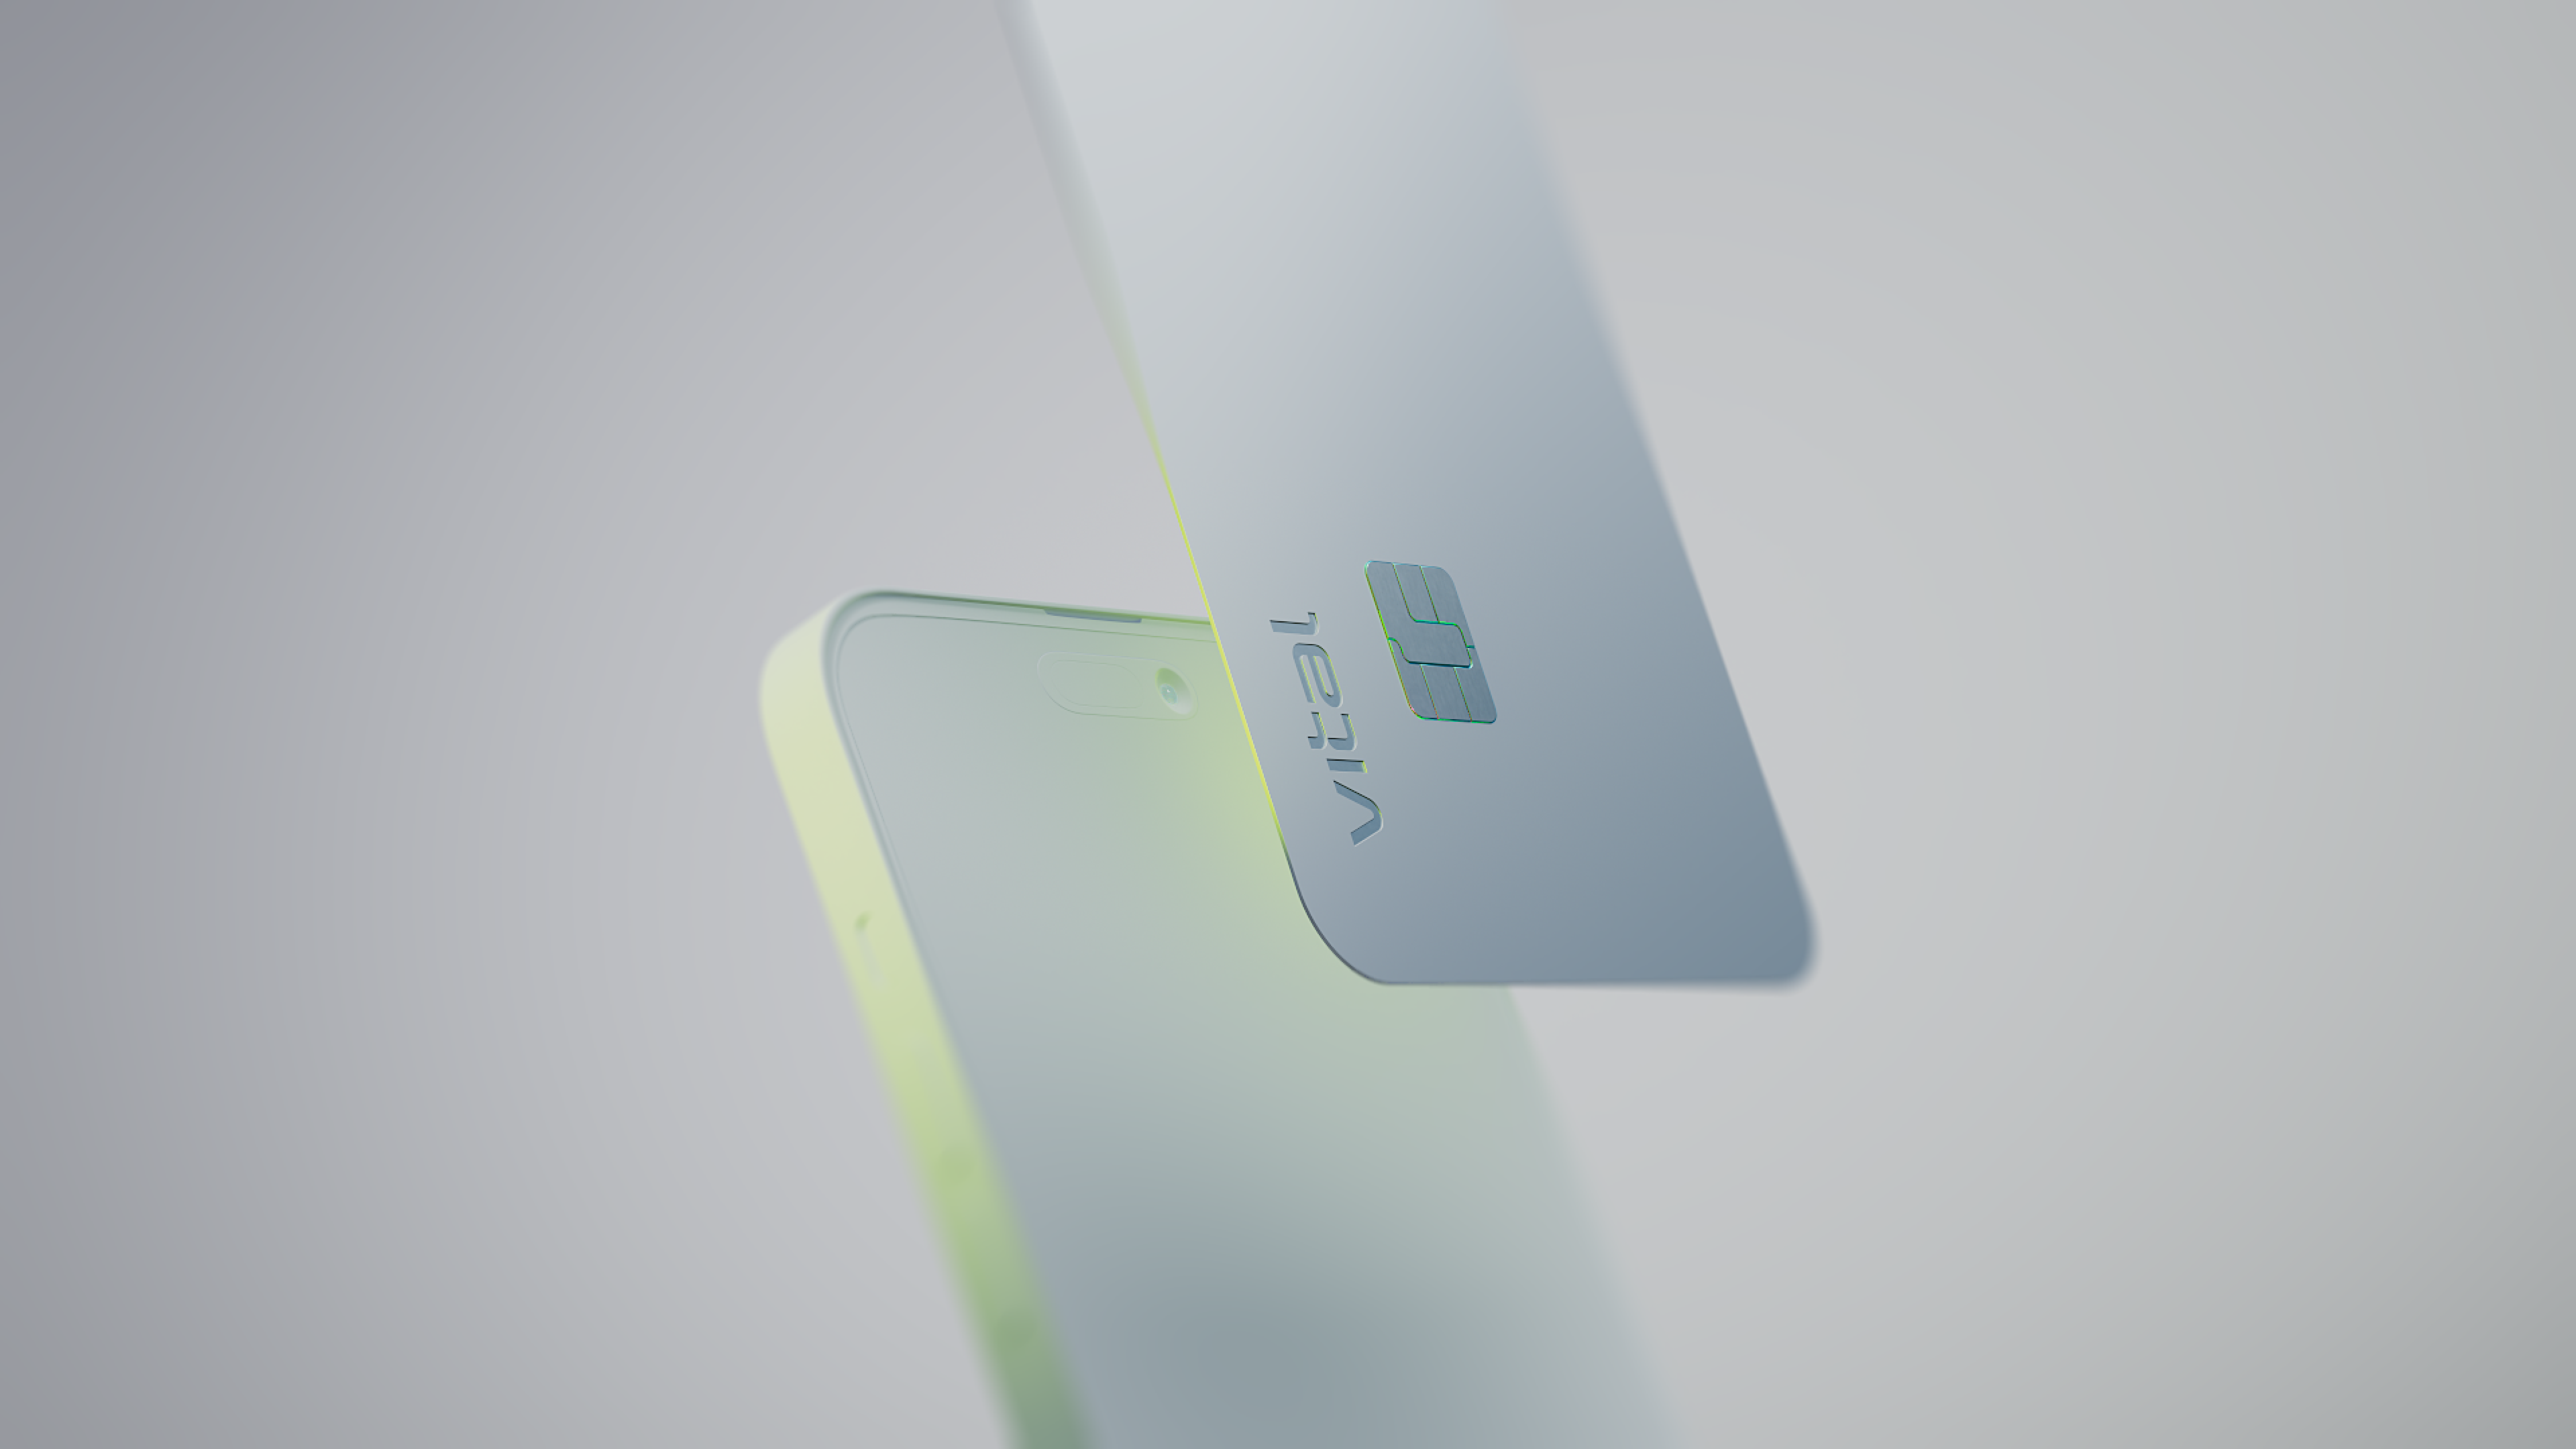 Against a gray background, a Vital Card orbits a white iPhone with a chartreuse glow